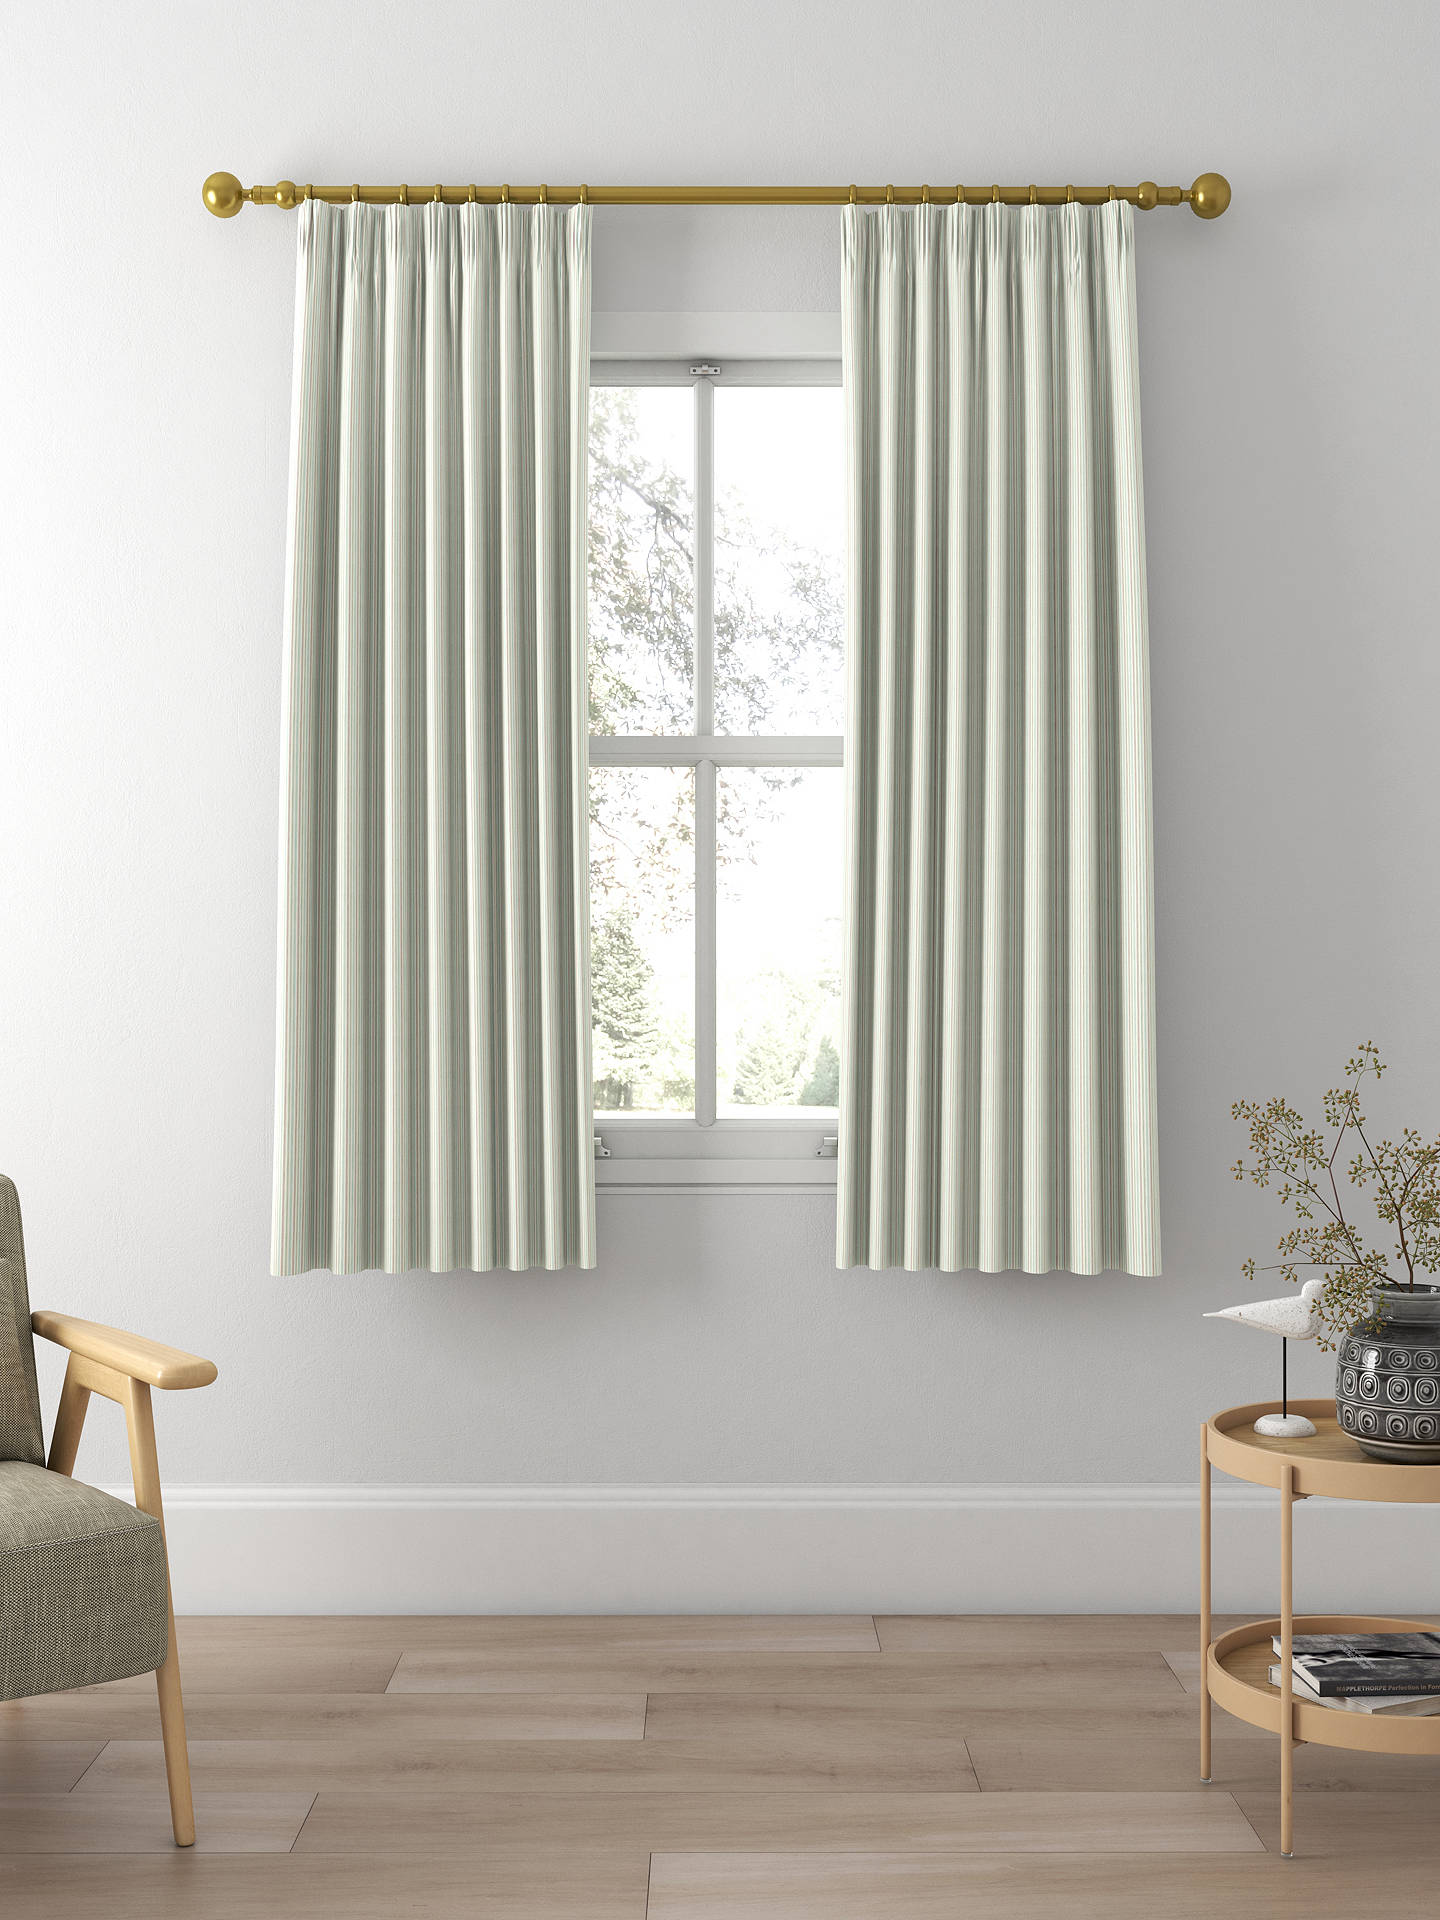 Sanderson Melford Made to Measure Curtains, Multi